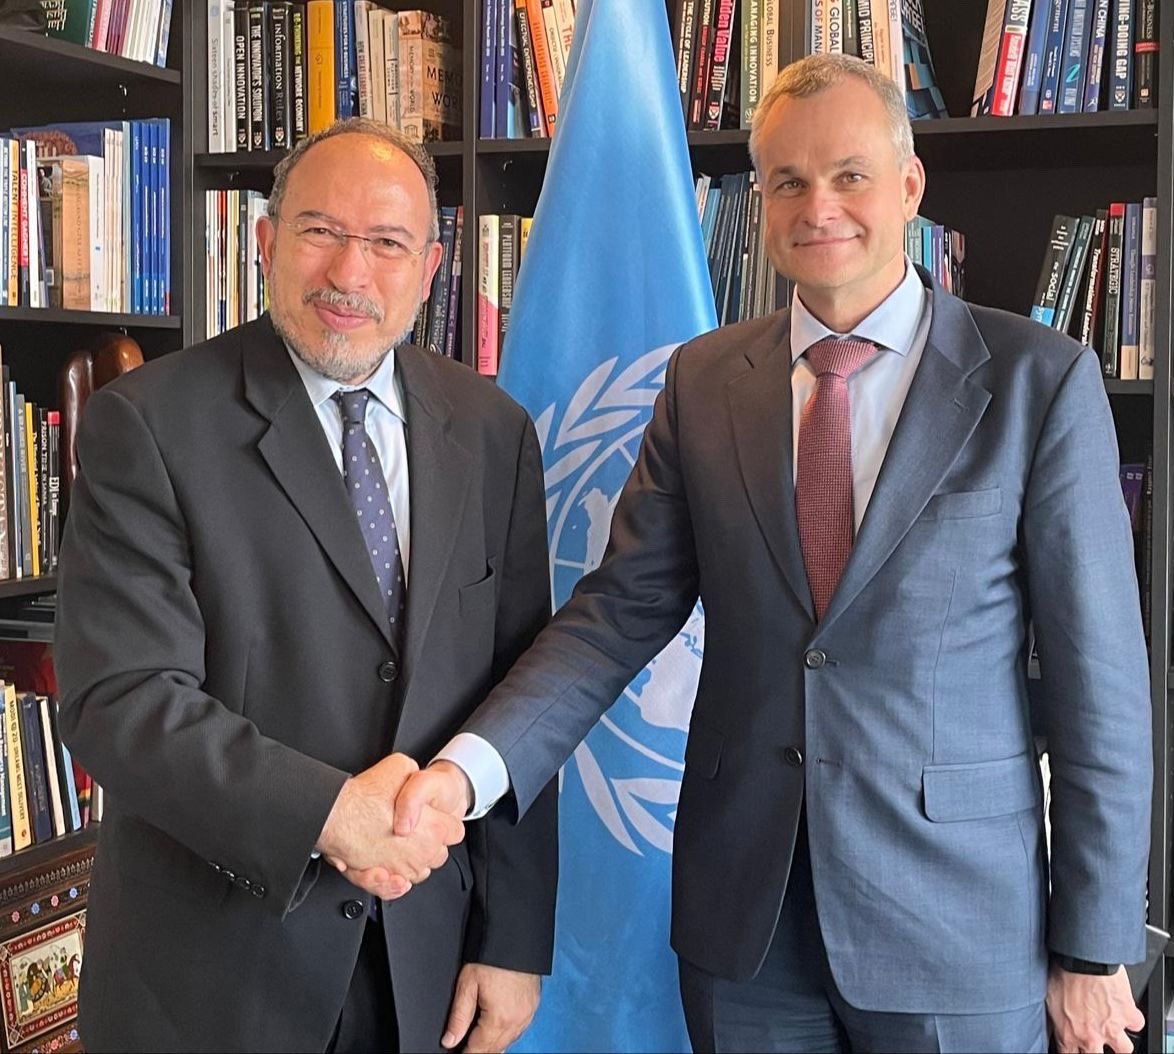 Very pleased discussing with H.E. Mr. Indulis Abelis, Ambassador and Permanent Delegate of #Latvia to #UNESCO, our cooperation on making the #SIDS Accelerator on ‘Digital Transformation in Education’ a reality. Looking forward to an impactful joint work!